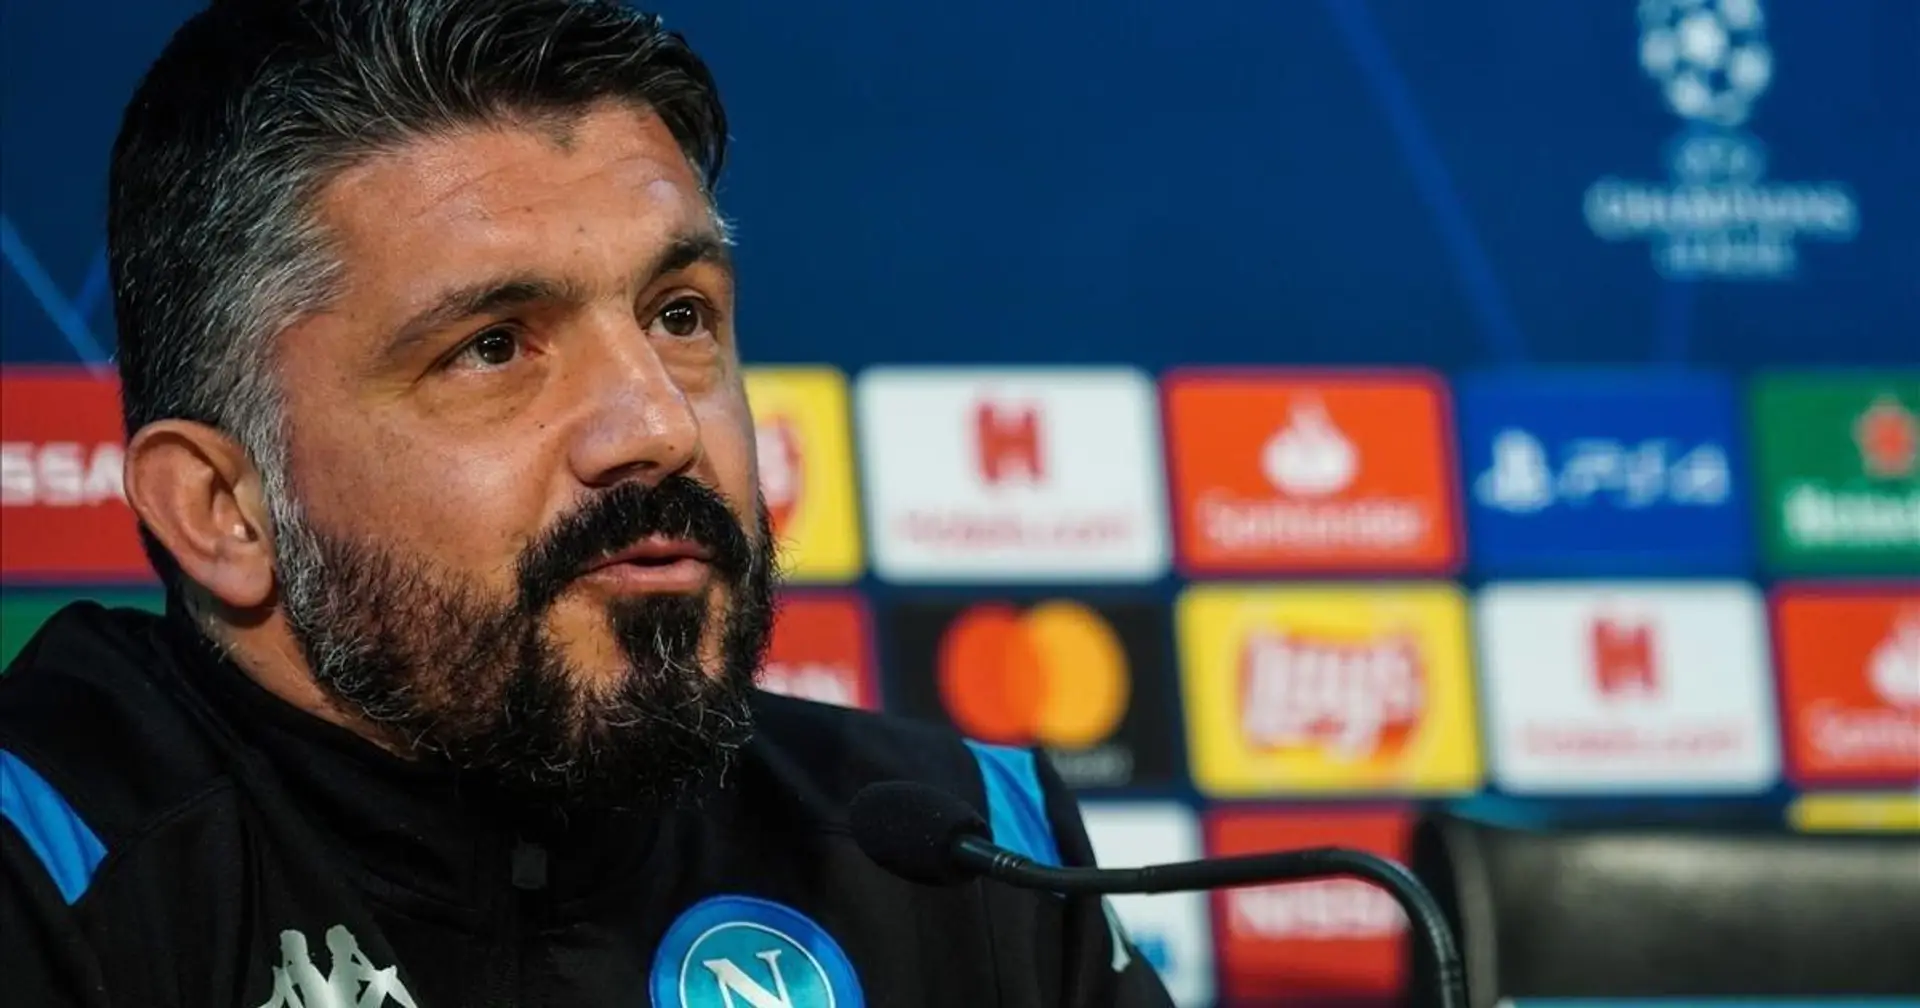 Napoli's boss Gattuso on Barca clash: 'We will have to climb Everest'